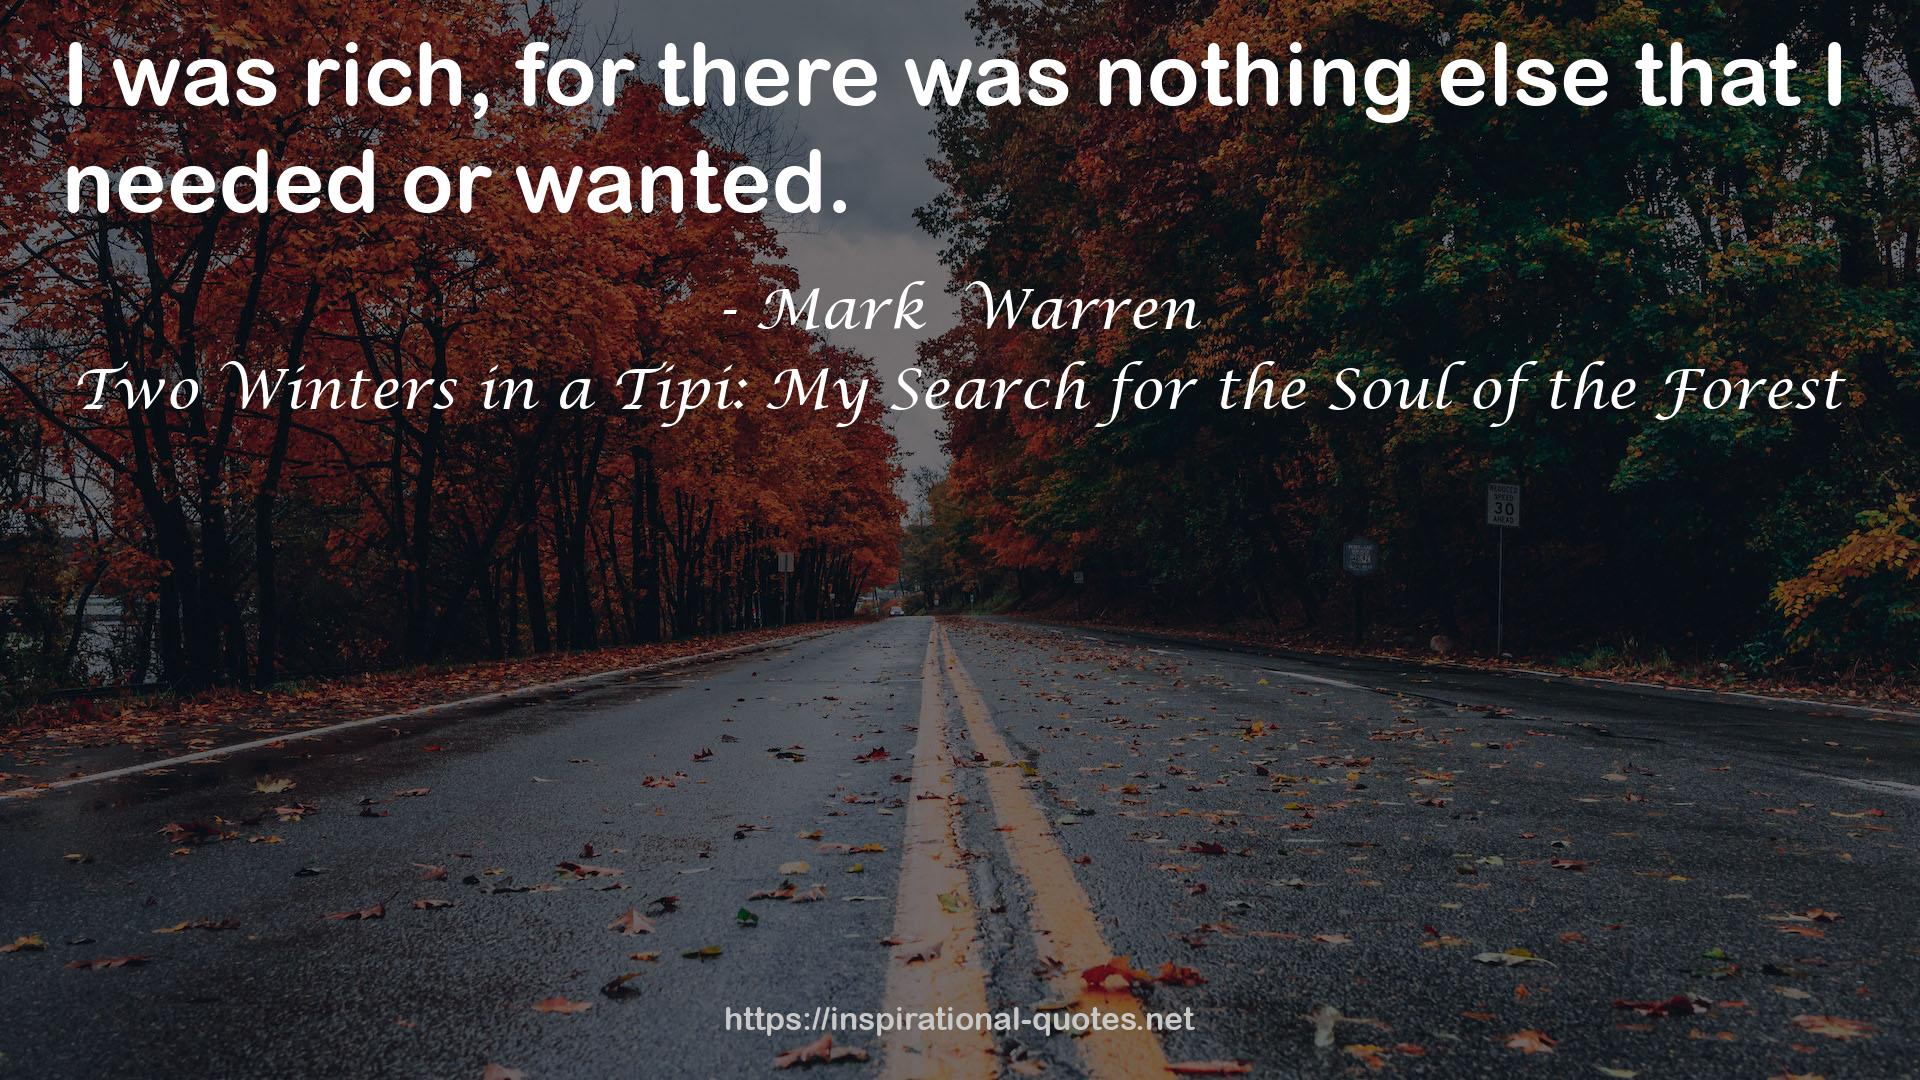 Two Winters in a Tipi: My Search for the Soul of the Forest QUOTES